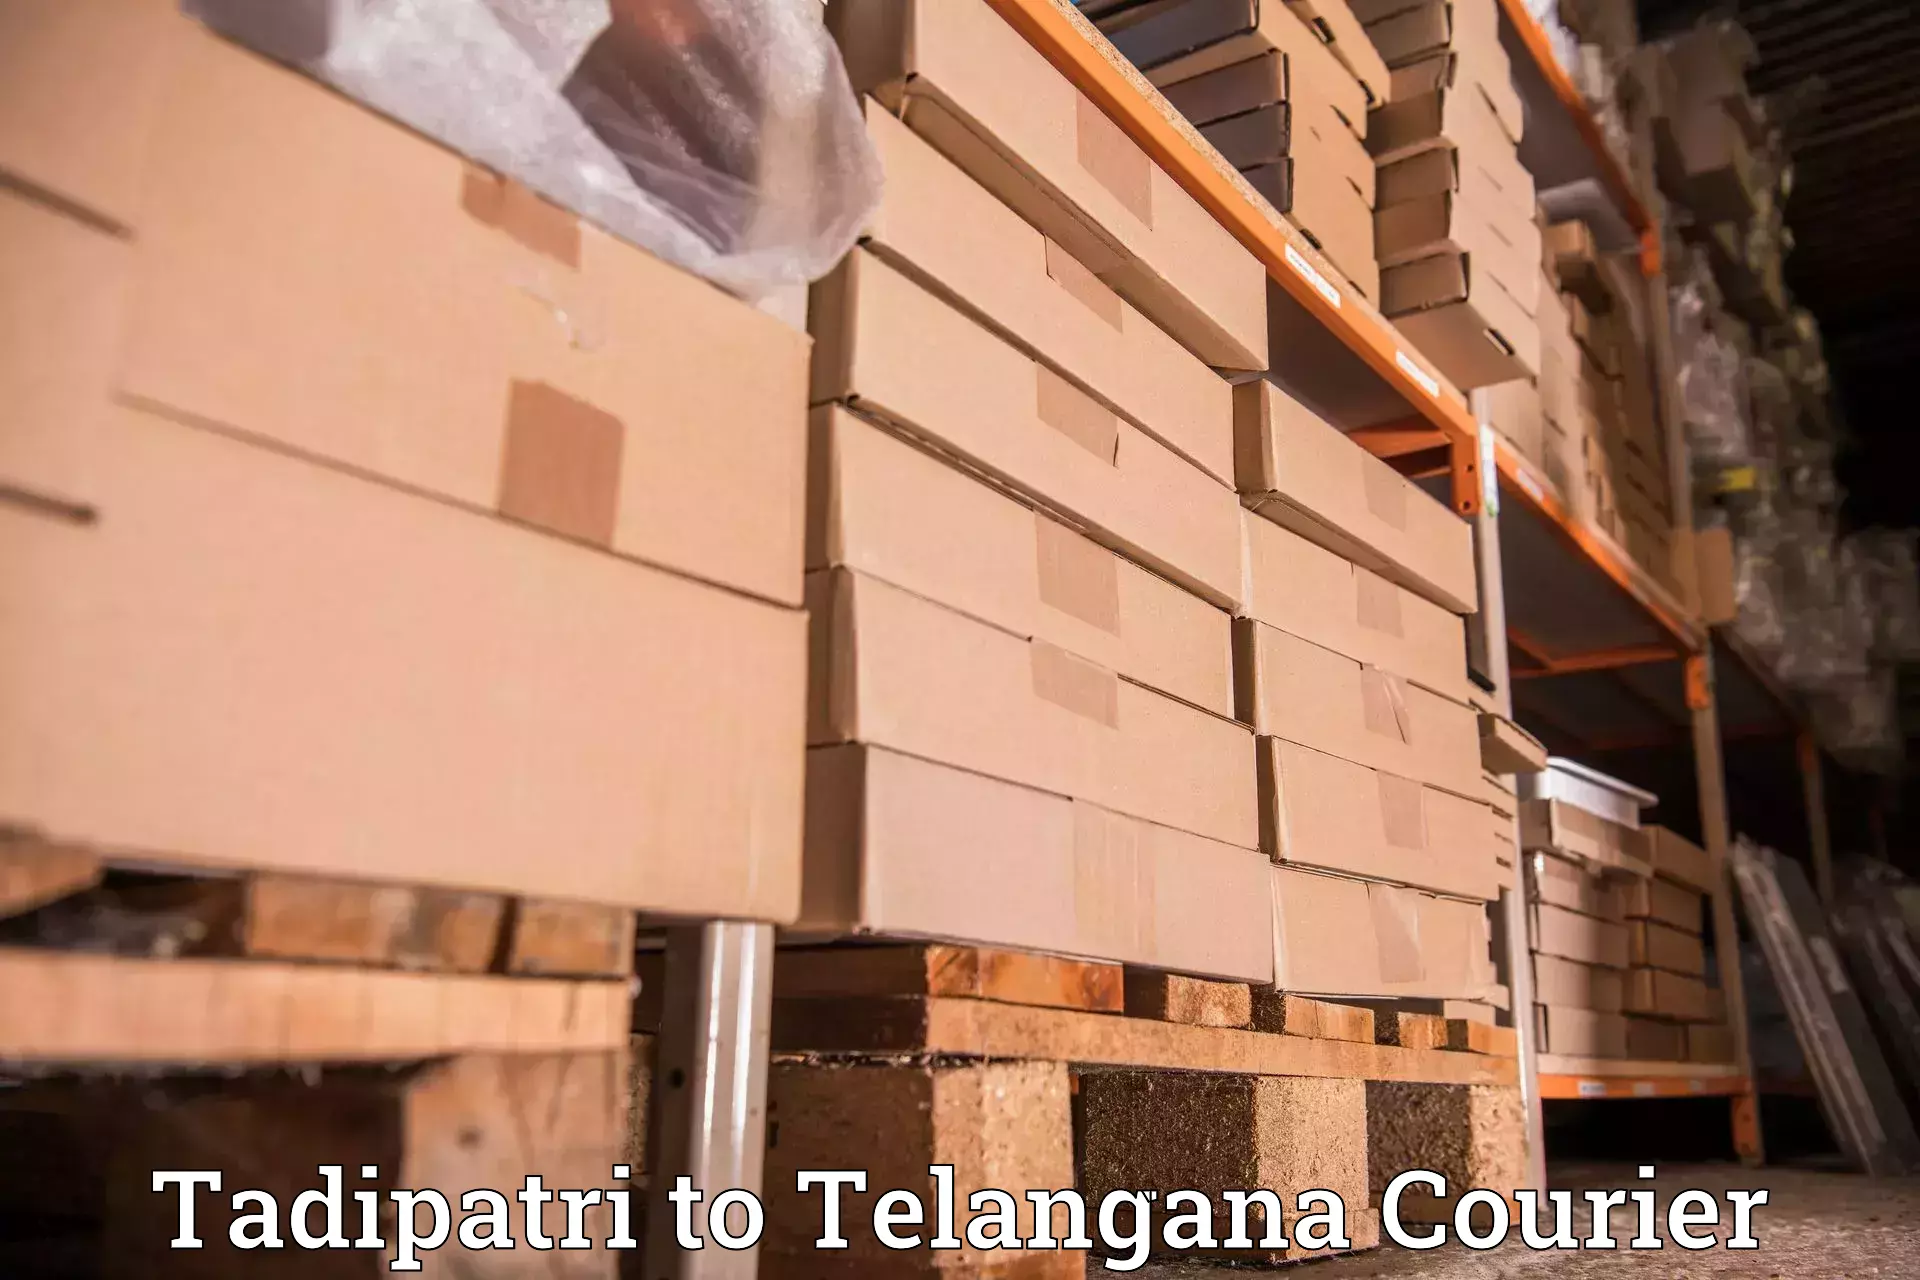 Package delivery network Tadipatri to Gangadhara